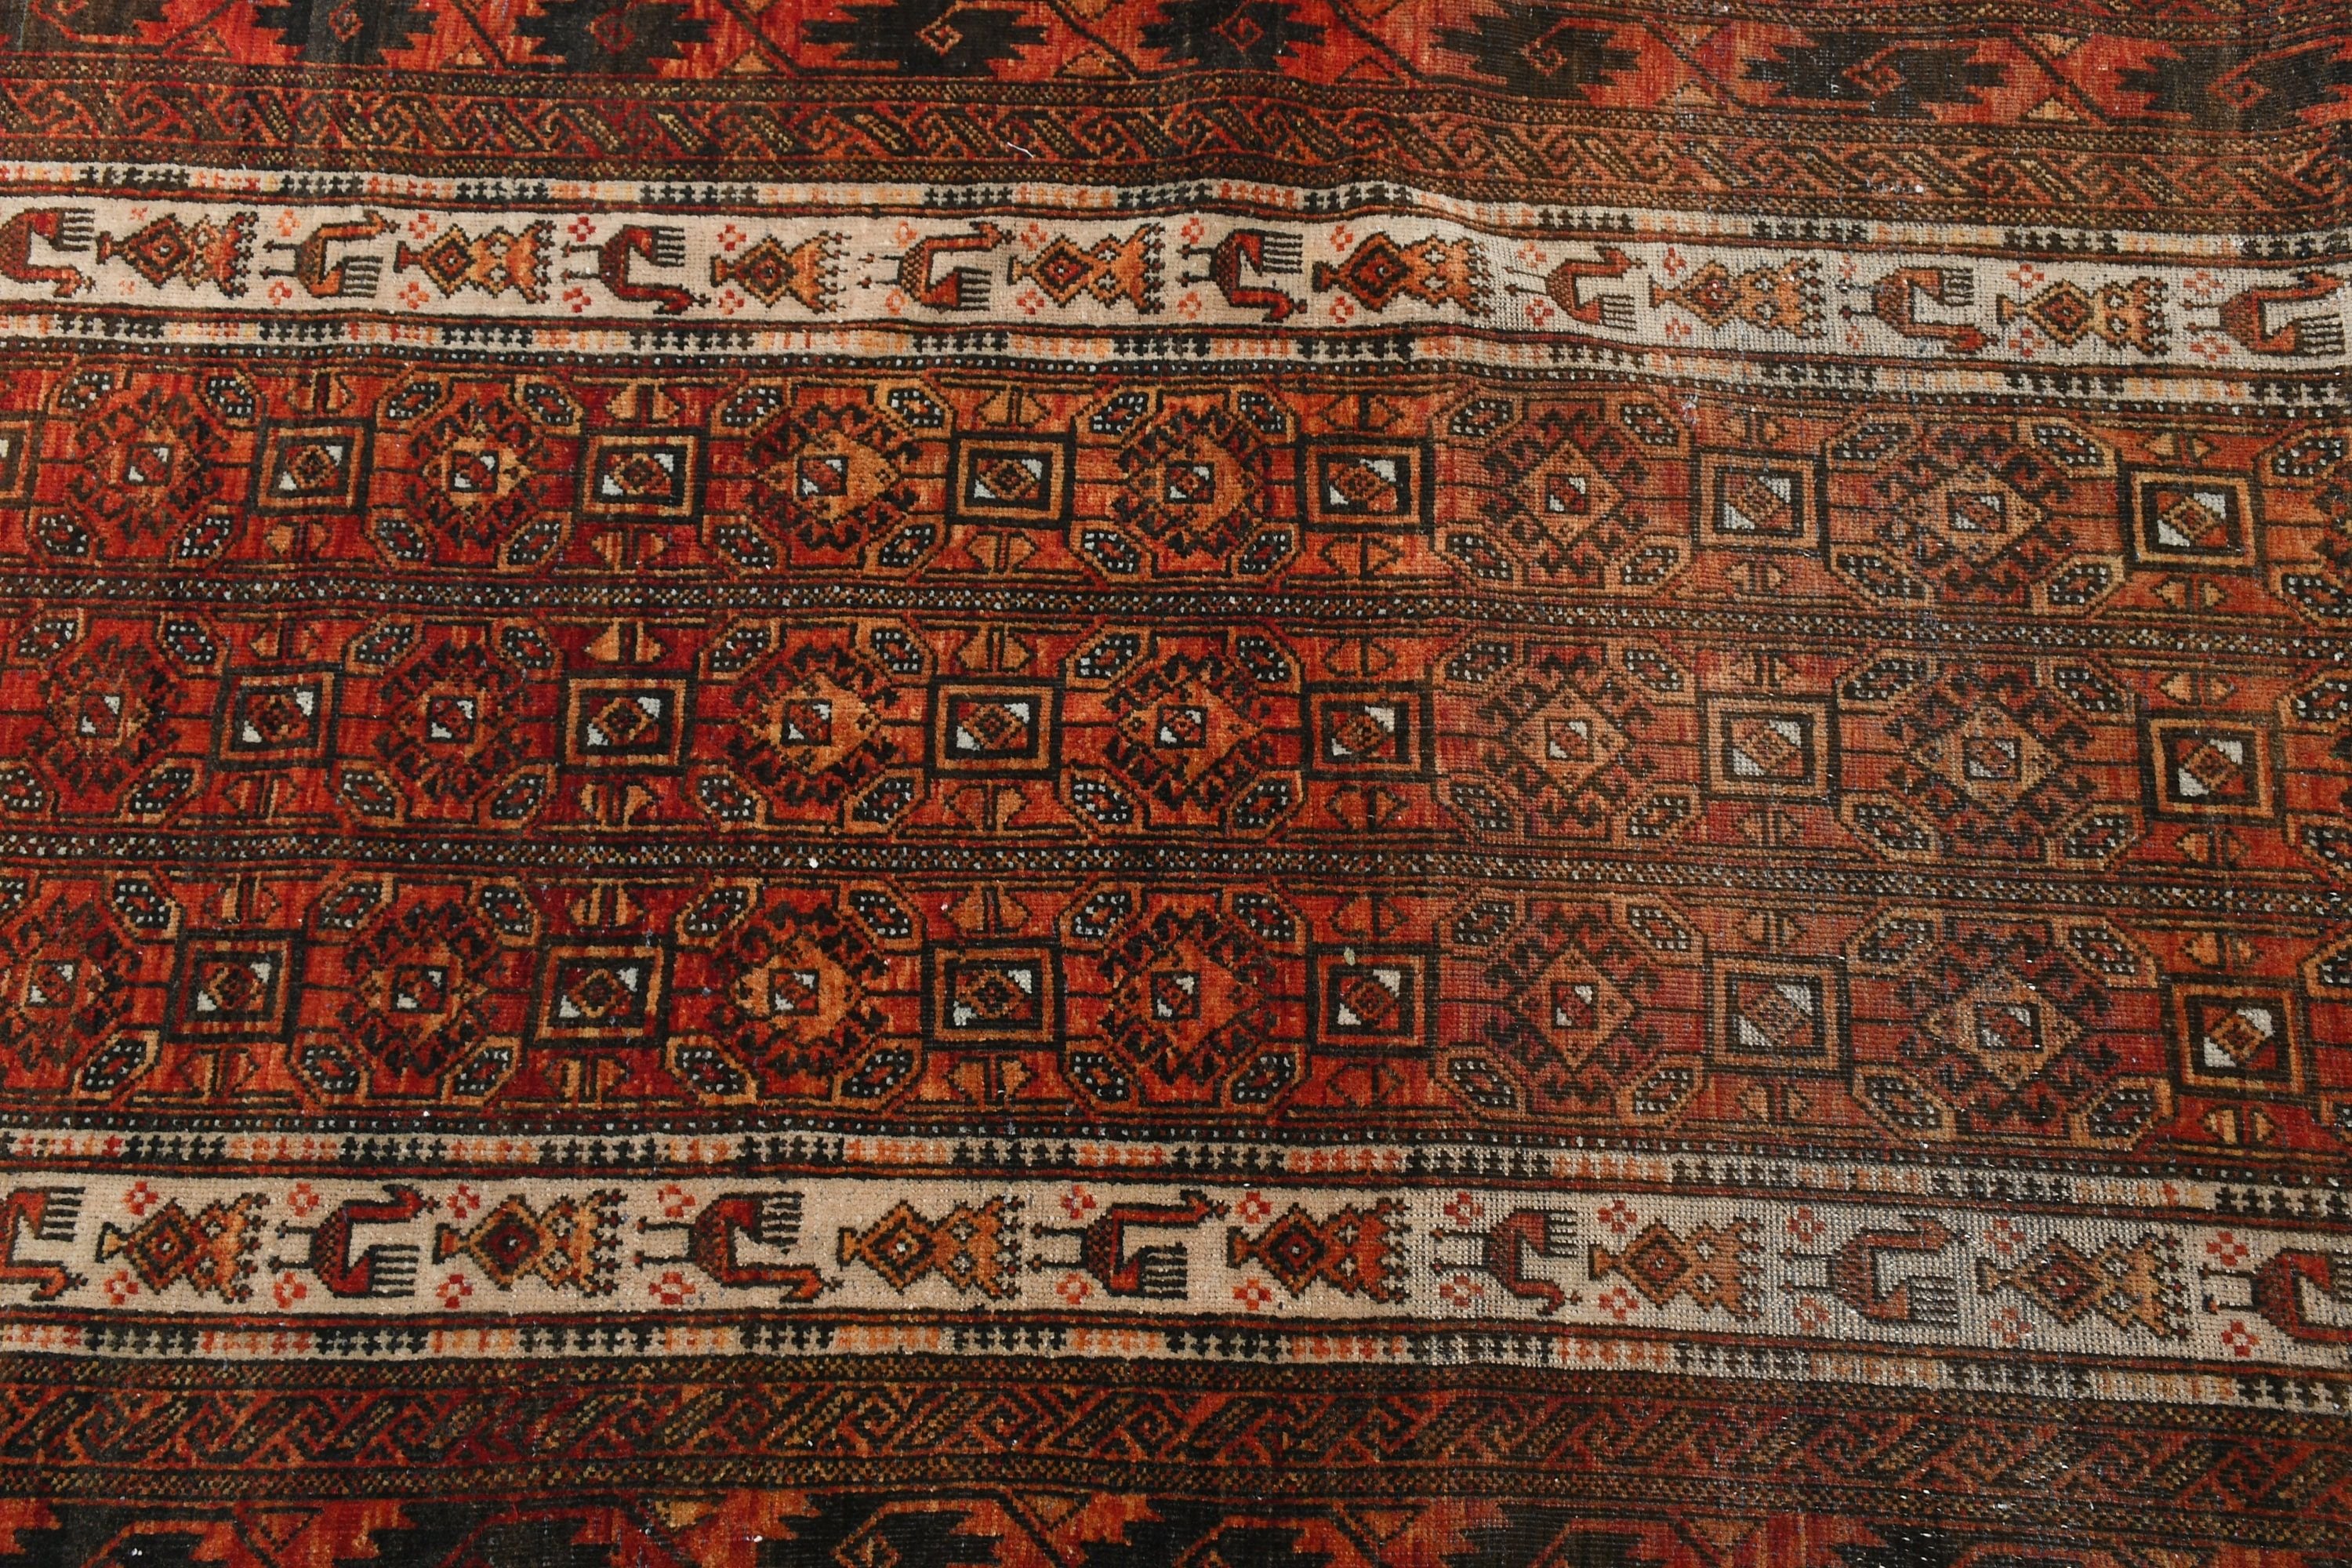 Entry Rug, Brown Cool Rugs, Vintage Rug, Bedroom Rug, Floor Rugs, 3.1x6.4 ft Accent Rugs, Turkish Rugs, Rugs for Kitchen, Anatolian Rugs